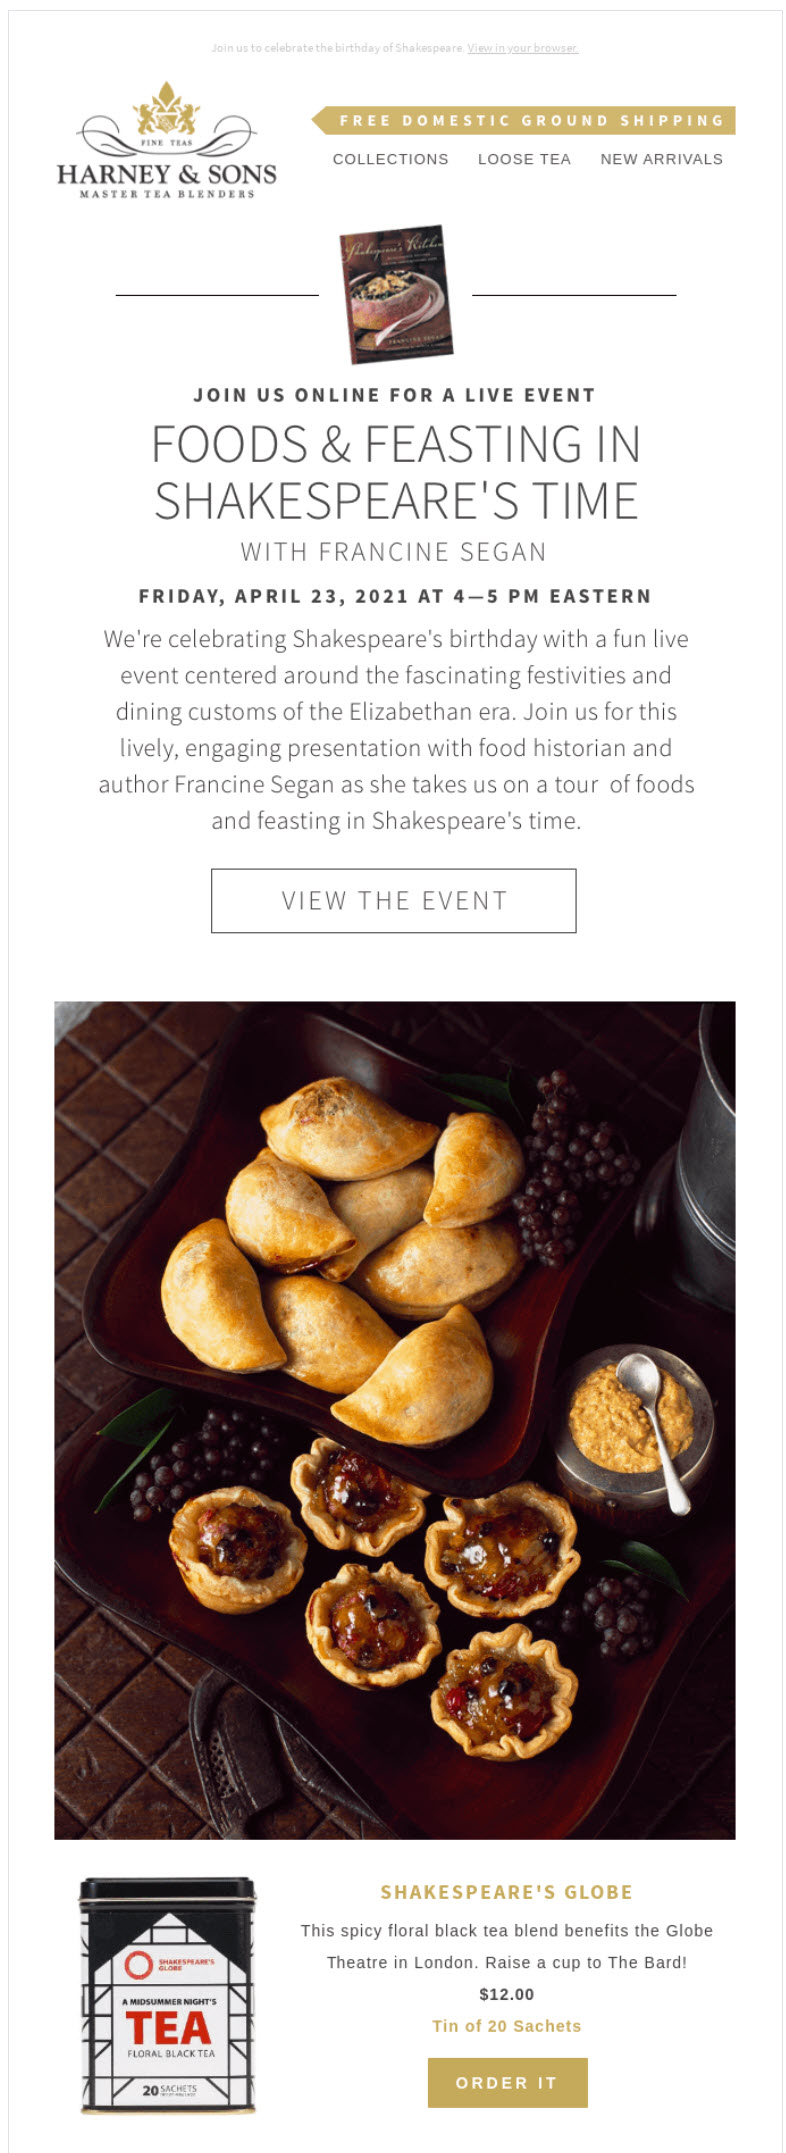 Harney & Sons Shakespeares Time food event announcement with CTA to view event information